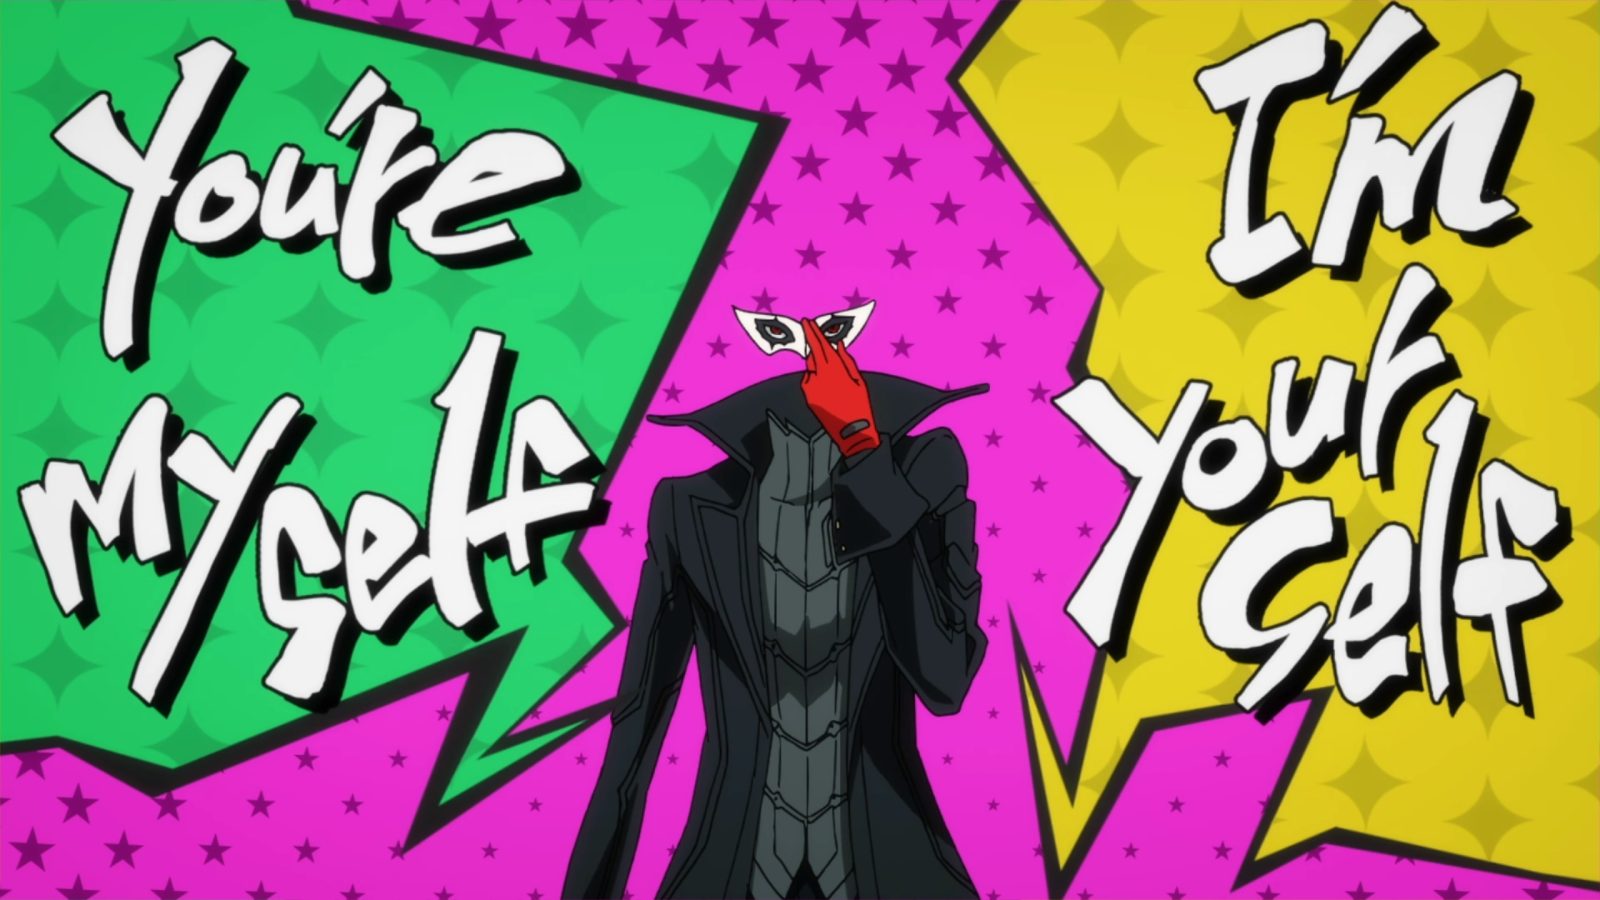 Persona 5 Royal review: This is the exact game I need right now